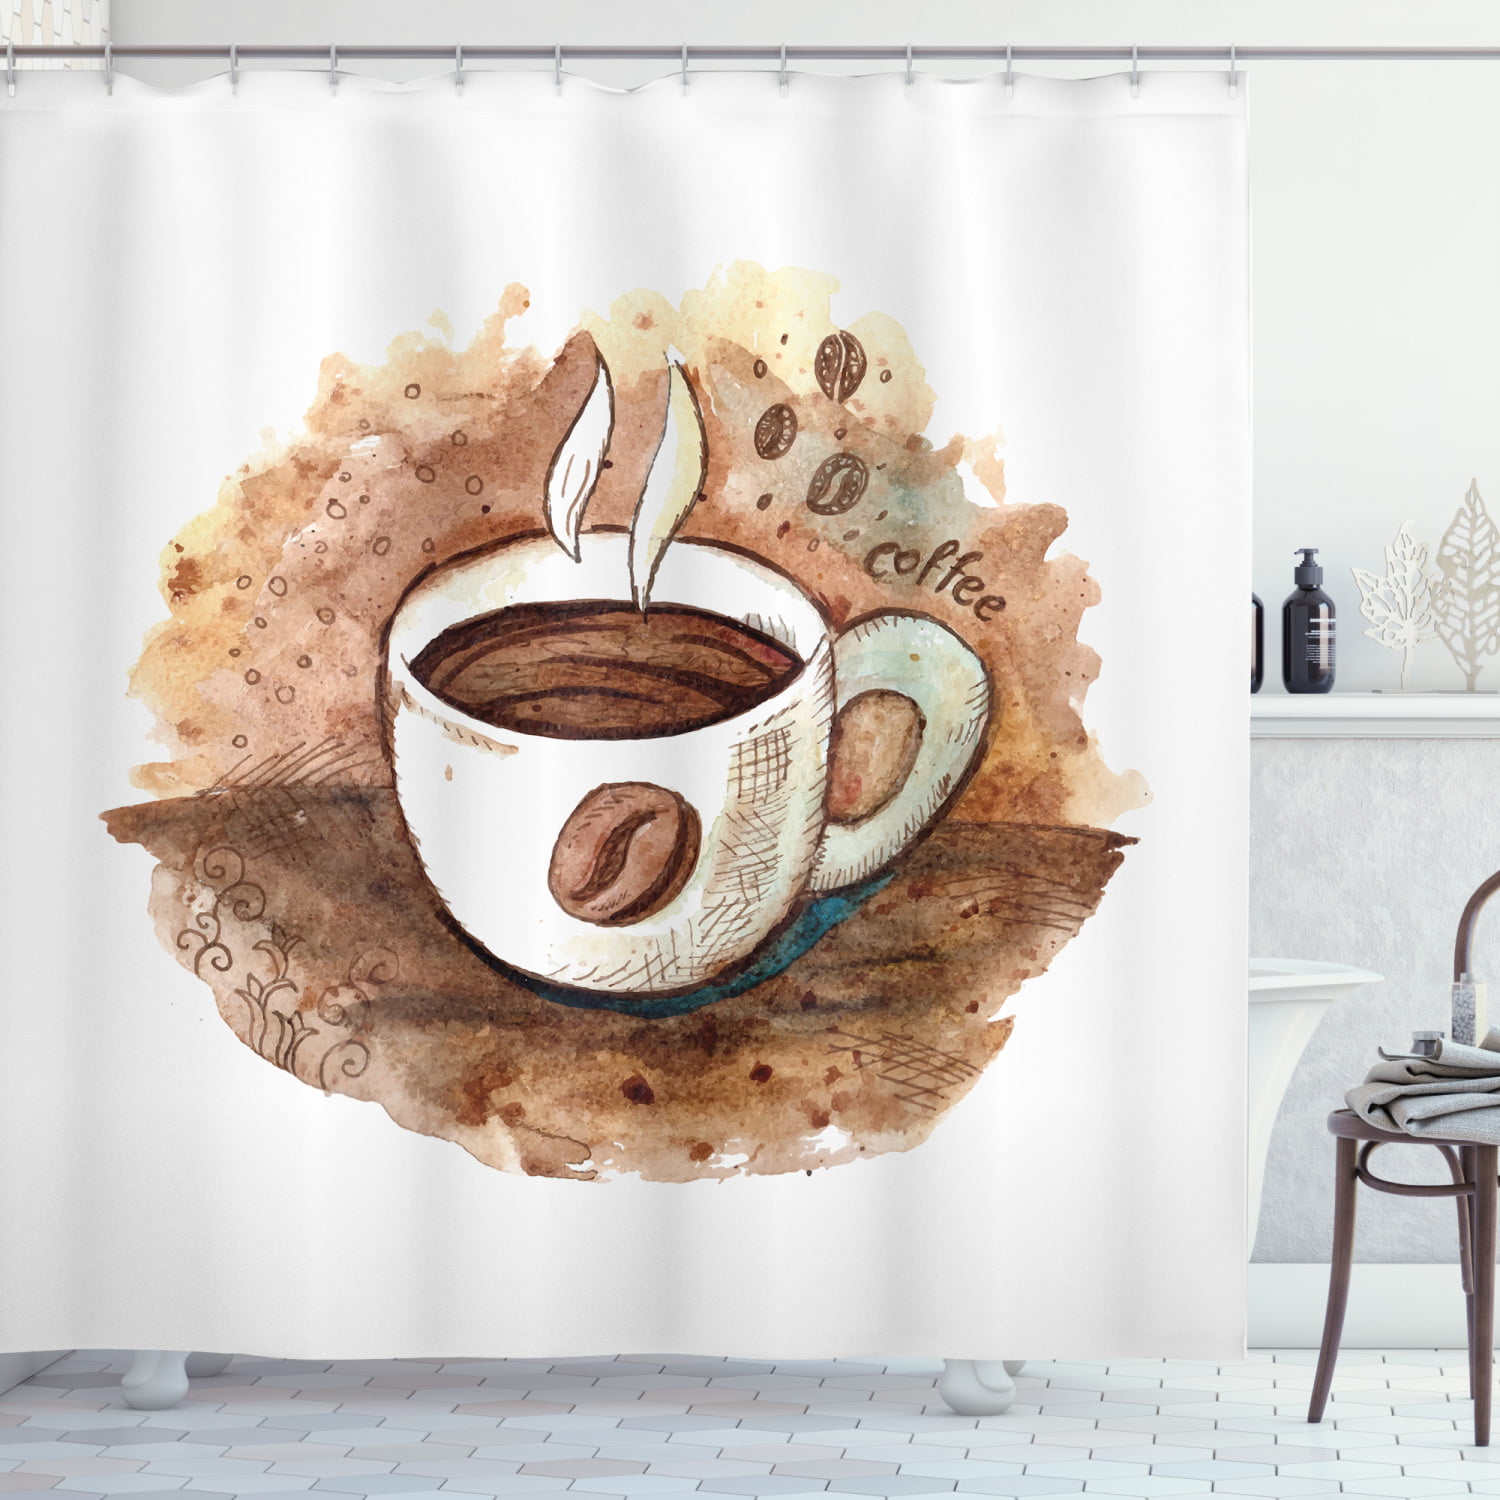 New Coffee Expresso Java Cappuccino Latte Shop Curtains Window Cover Valance 